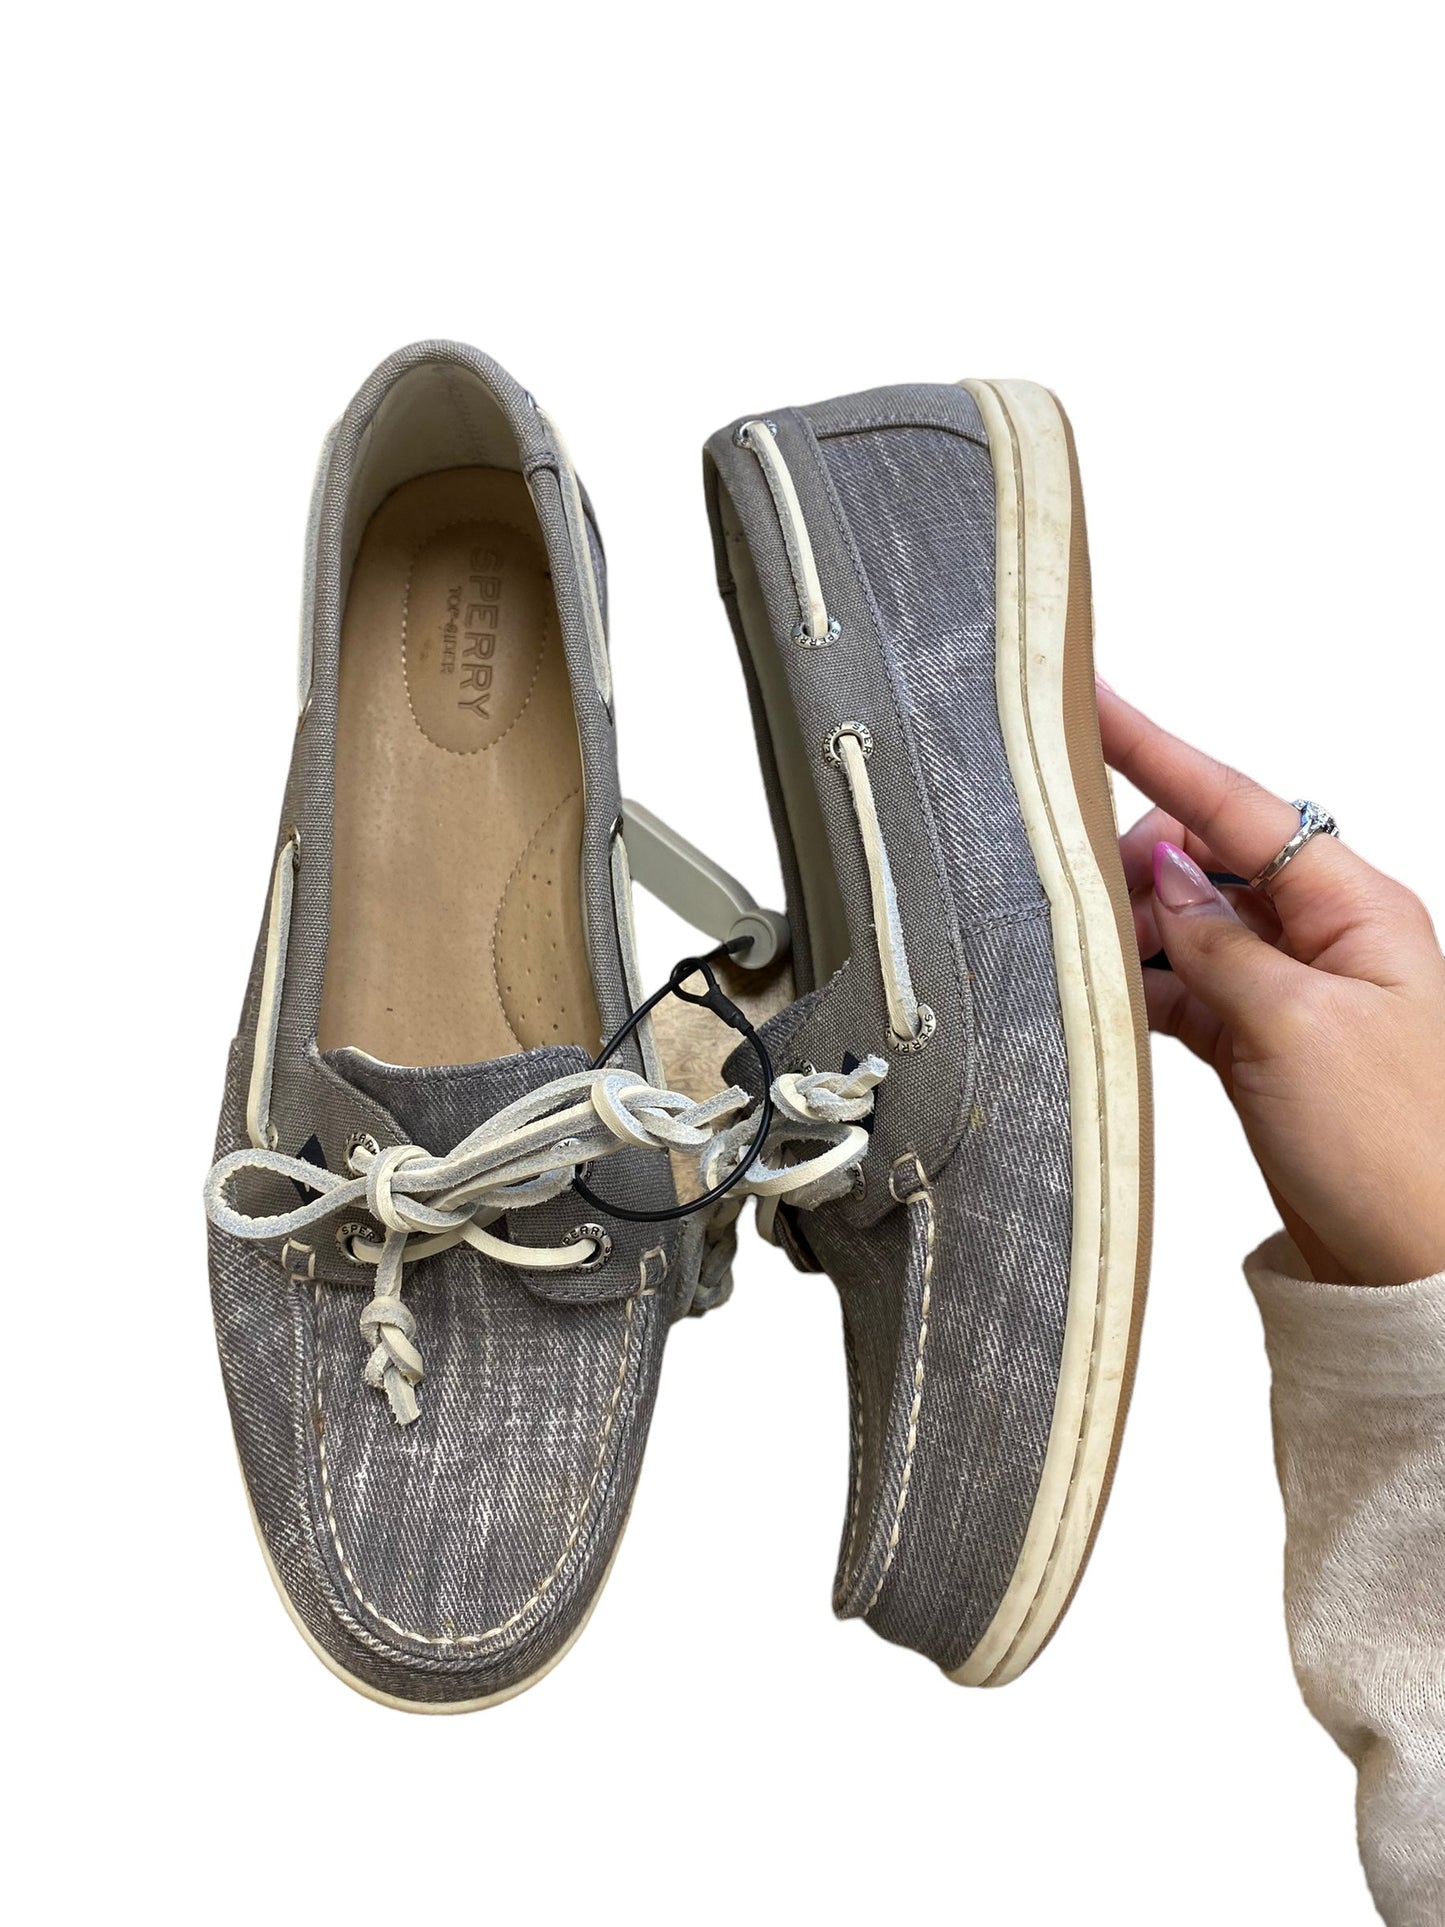 Shoes Flats Ballet By Sperry  Size: 9